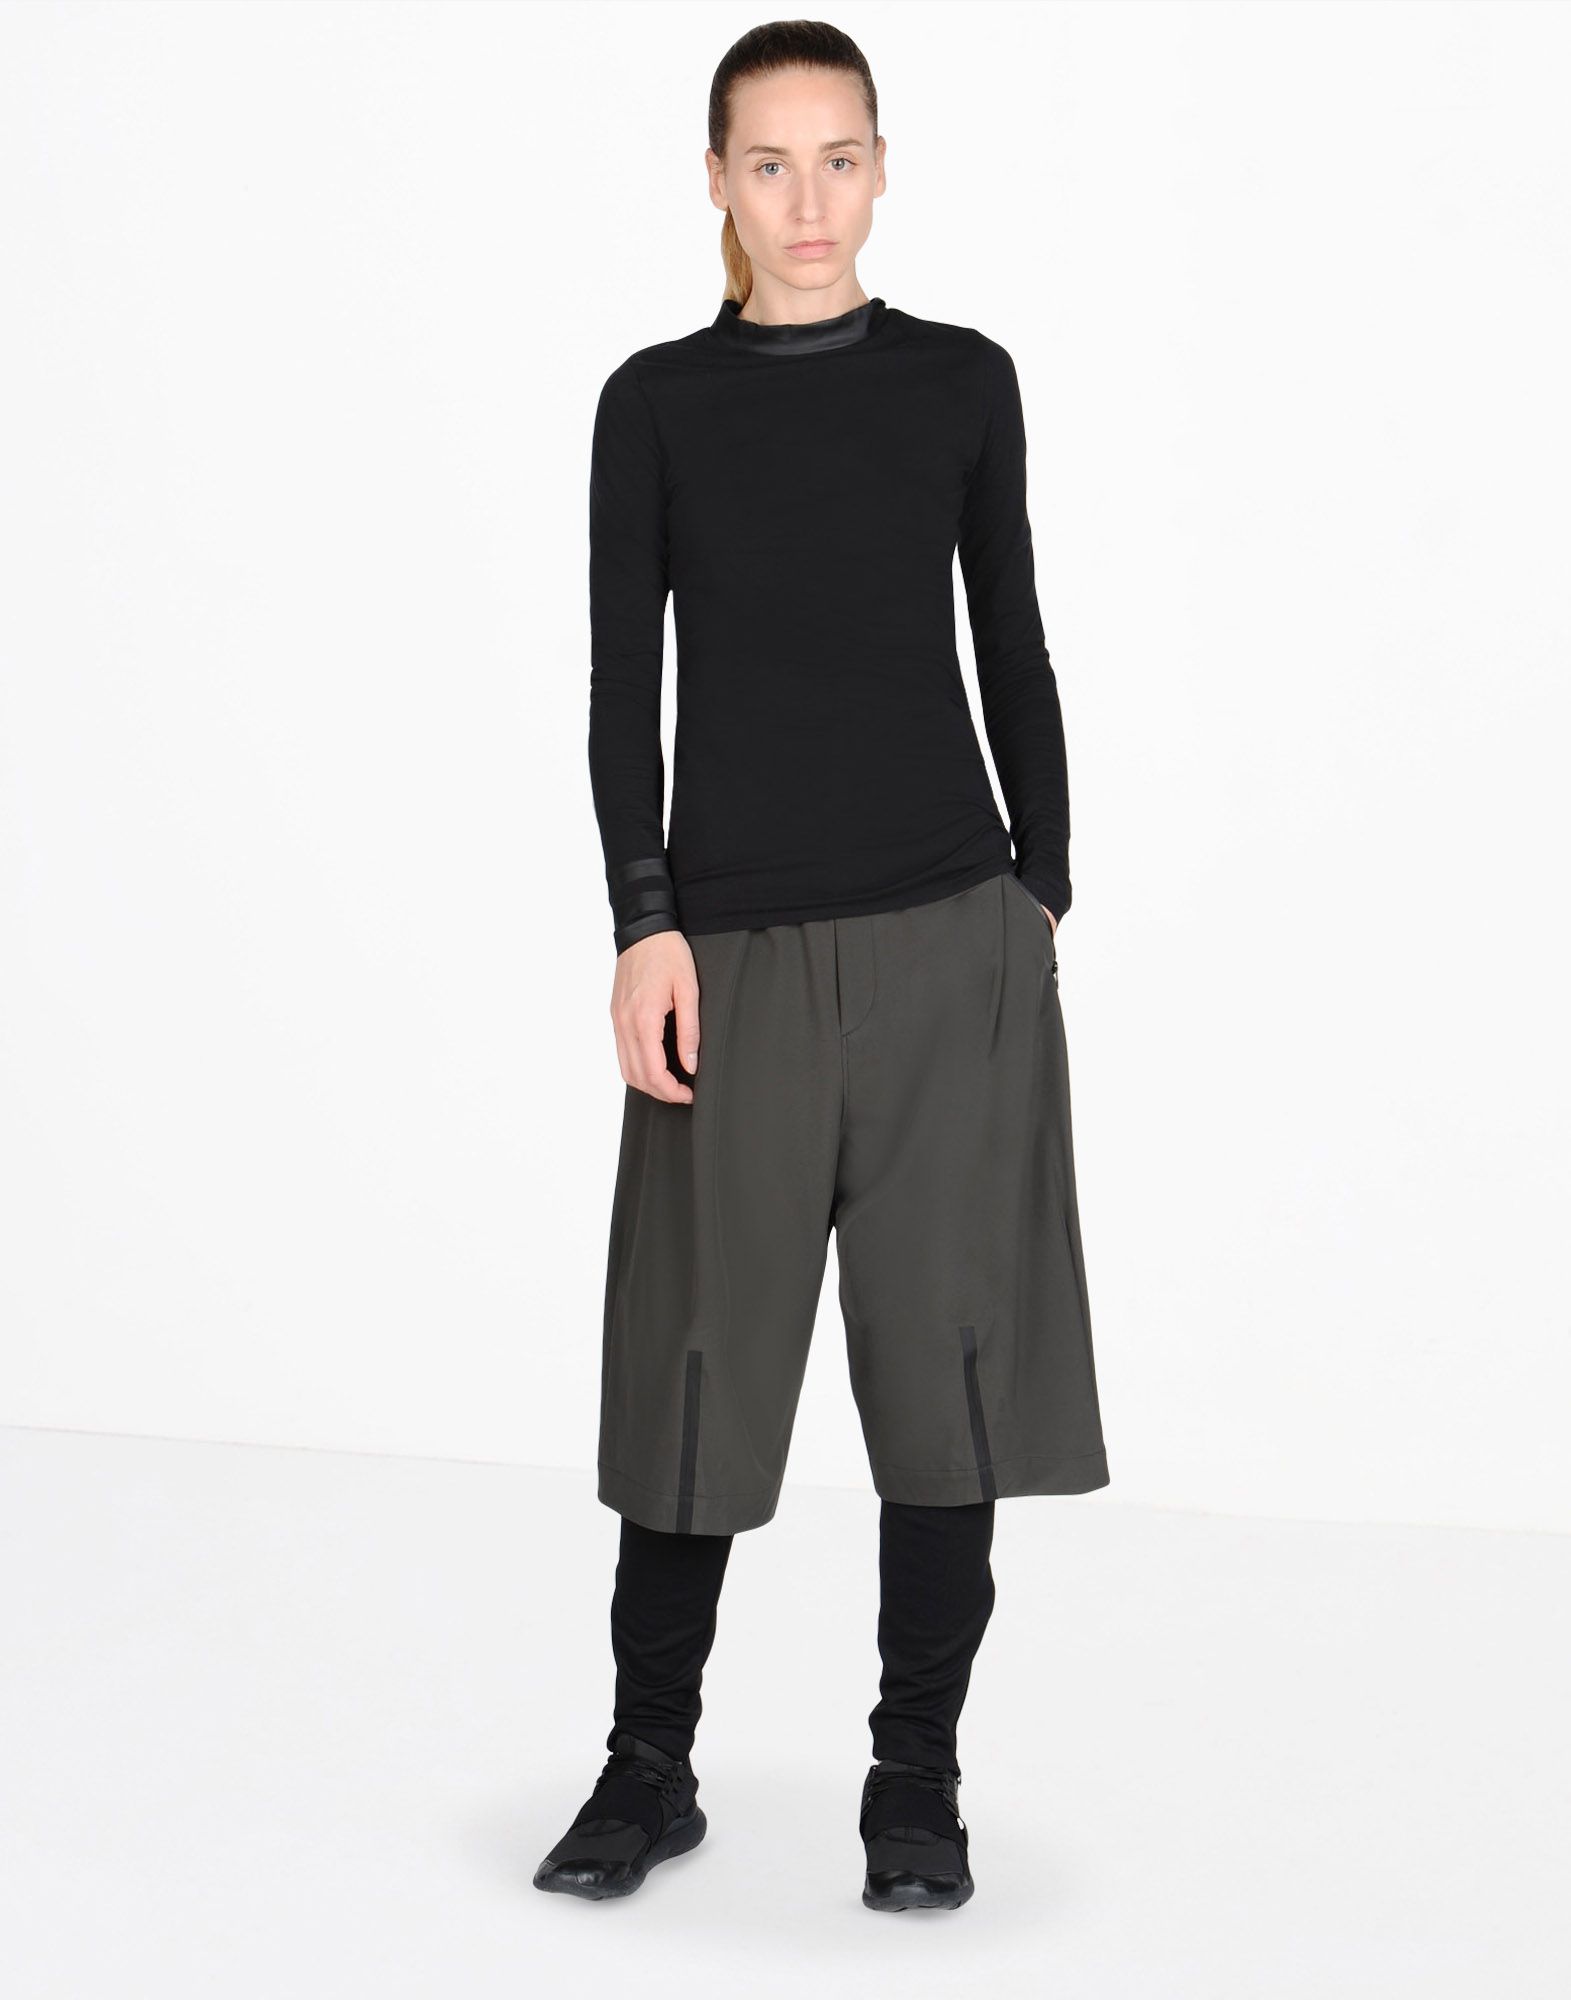 Y 3 3 LAYER SPORT PANT for Women | Adidas Y-3 Official Store